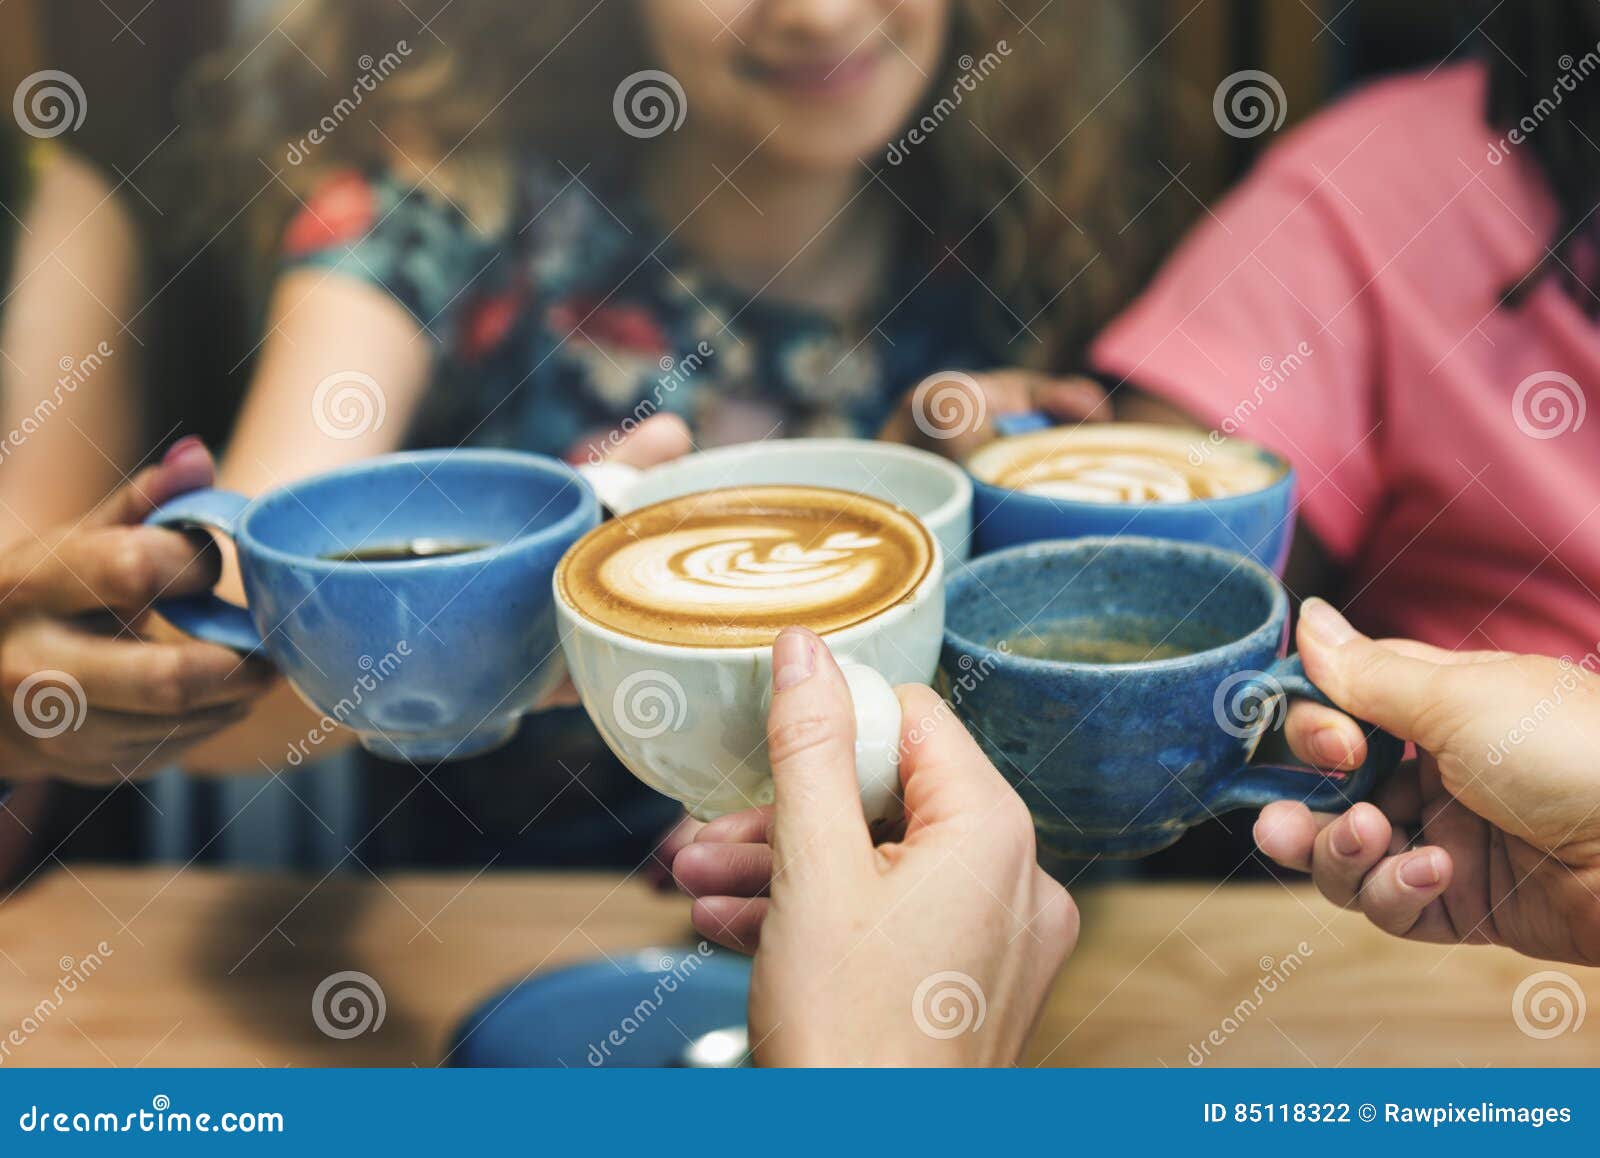 young women drinking coffee concept